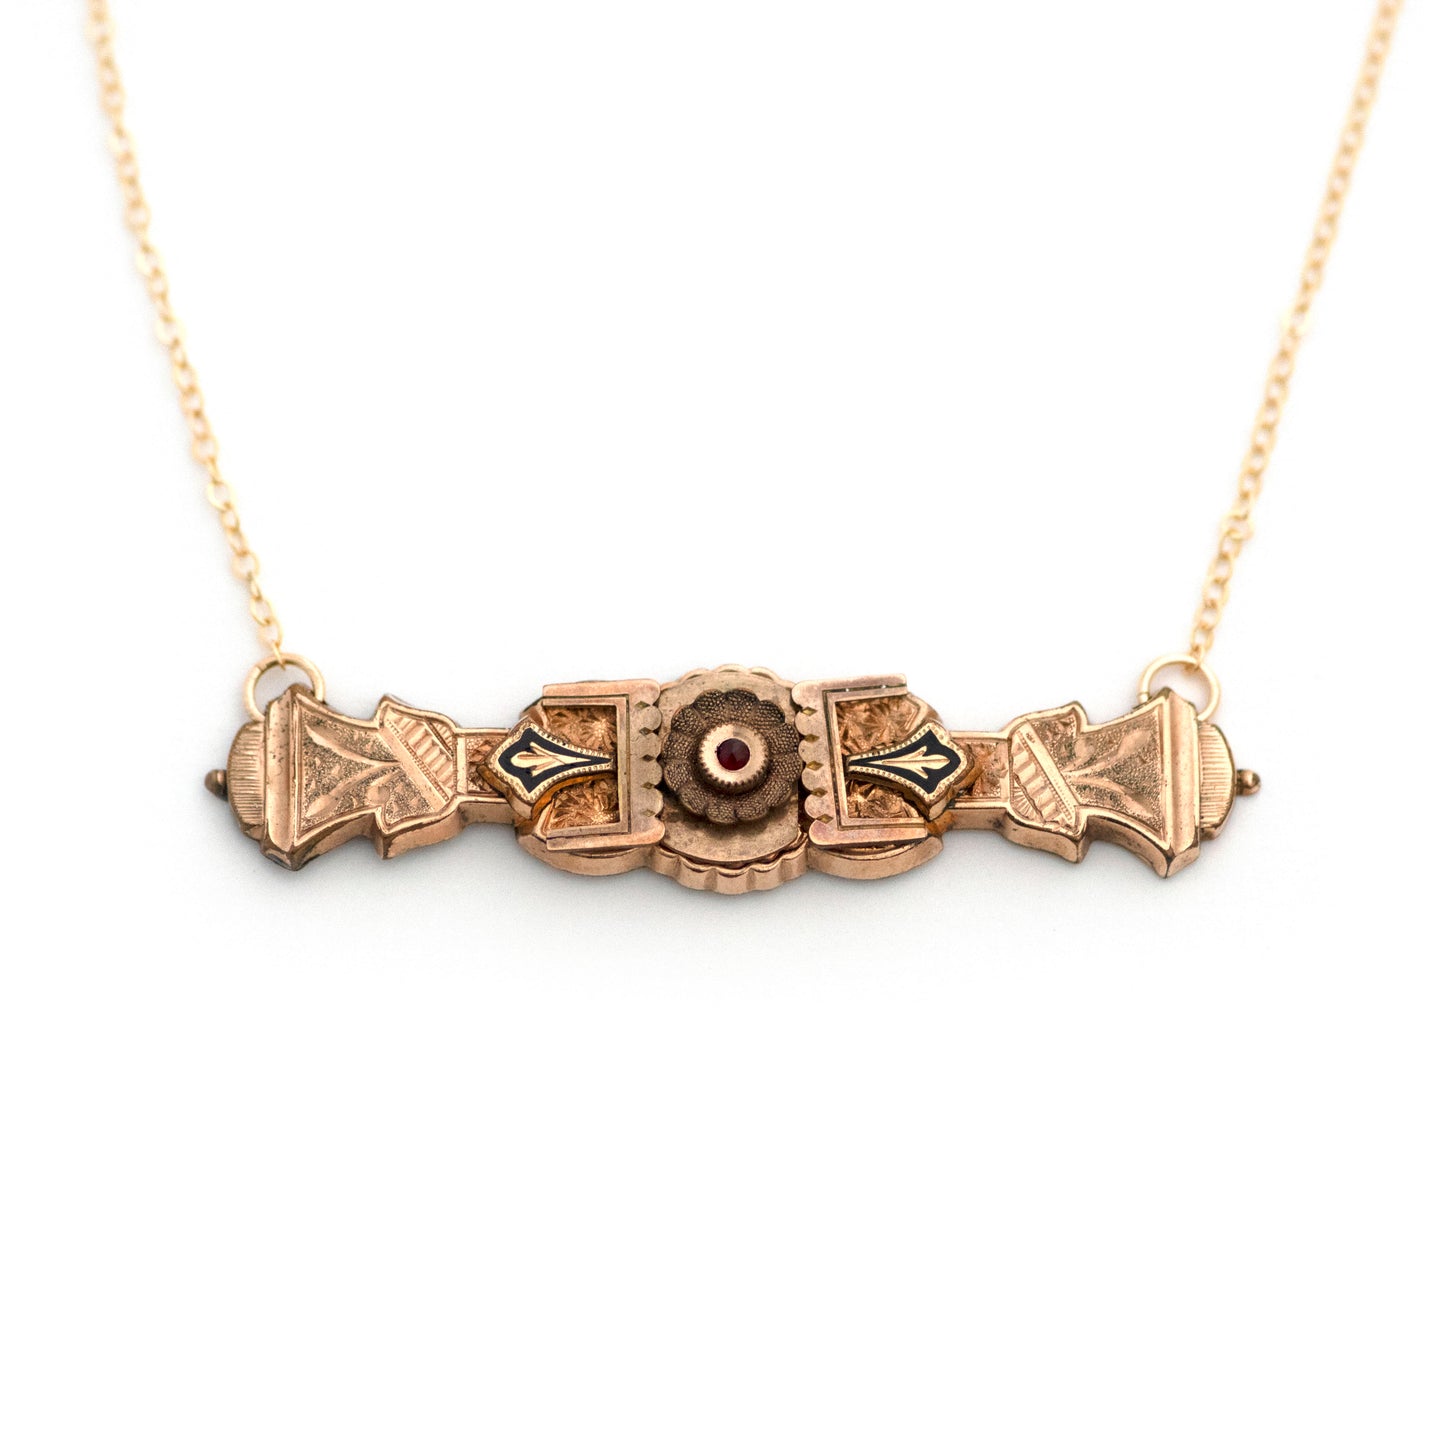 This one-of-a-kind conversion necklace is made up of:  Gold filled Victorian bar pin pendant from the late 1800s with hand tooled details, black enamel (taille d'epargne) and a Bohemian garnet. Pendant measures 2.4" wide.